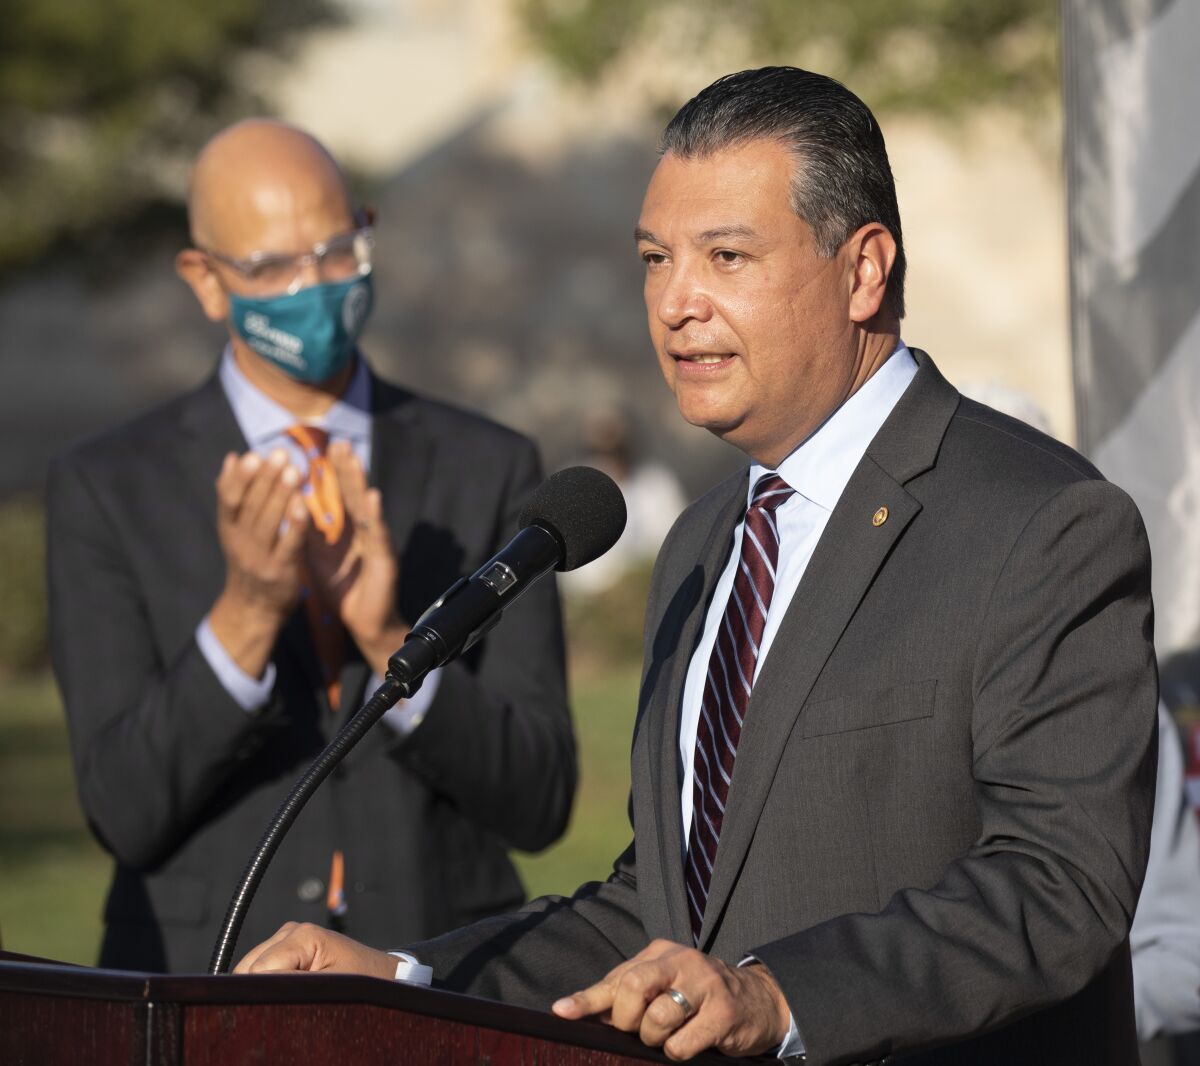 Alex Padilla speaks at a lectern while a man behind him applauds.